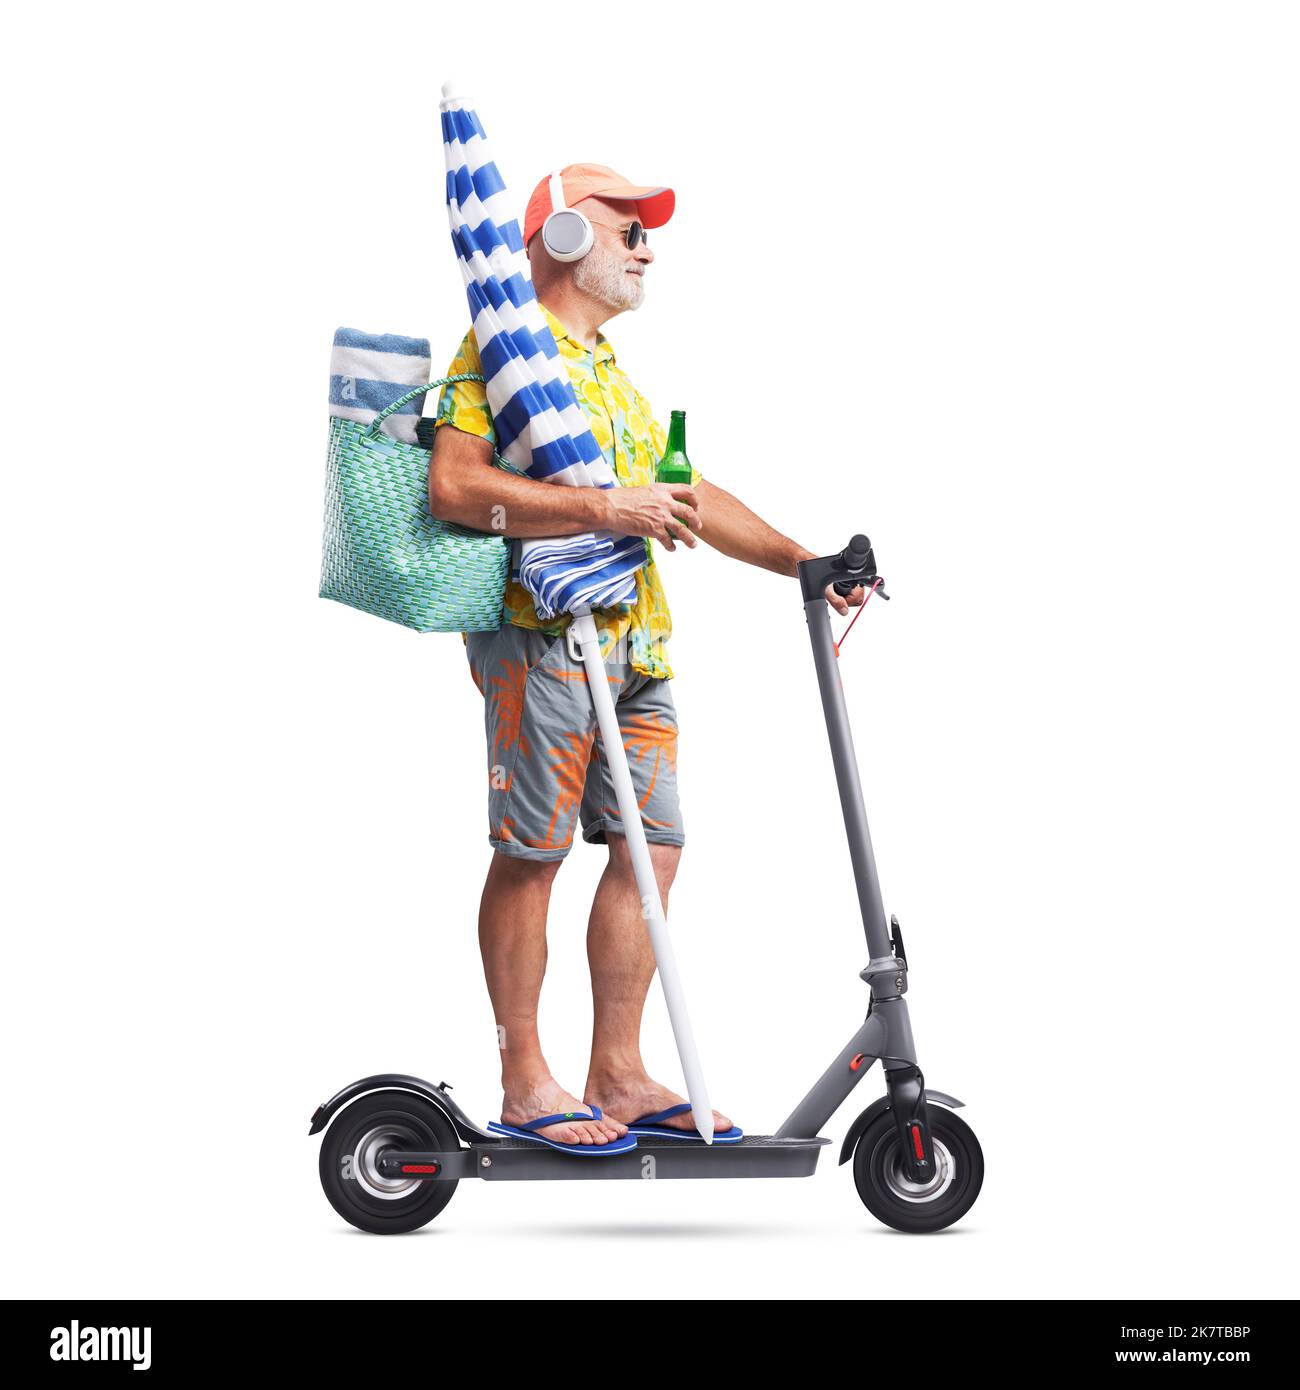 Funny senior tourist going to the beach on his electric scooter, he is holding a beach umbrella, isolated on white background Stock Photo